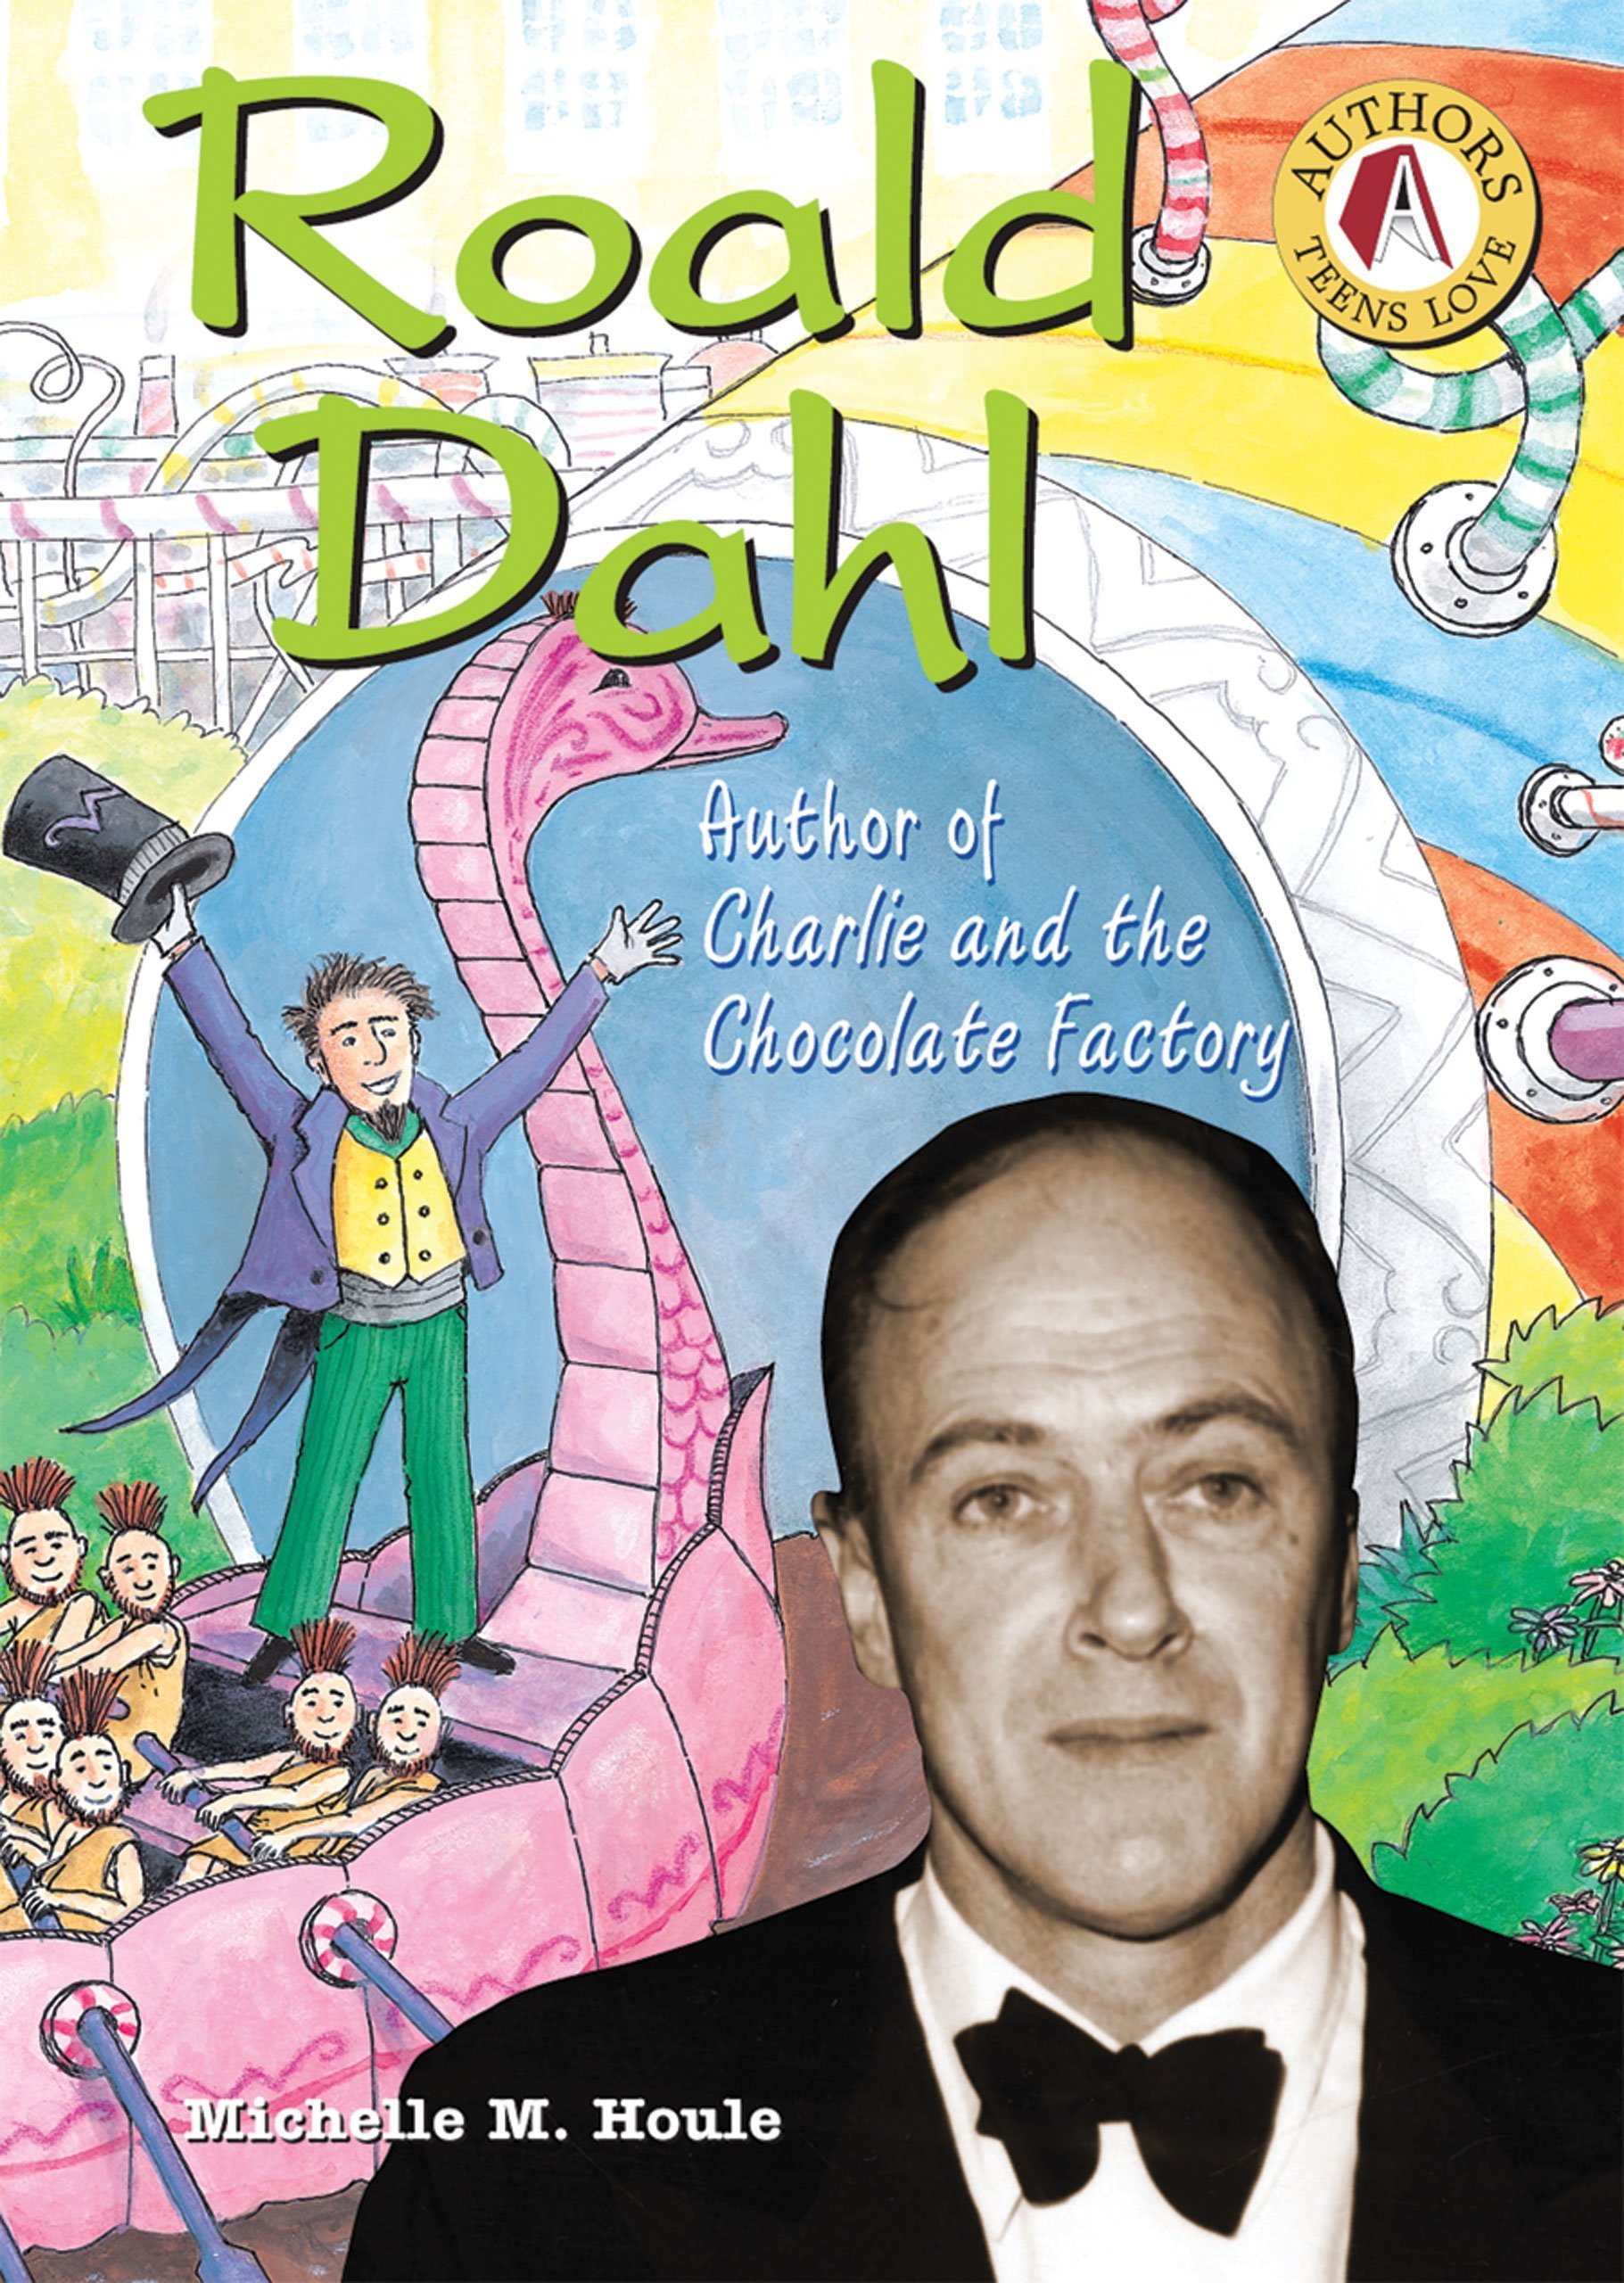 Roald Dahl: Author of Charlie and the Chocolate Factory cover – Roald Dahl Fans1821 x 2560